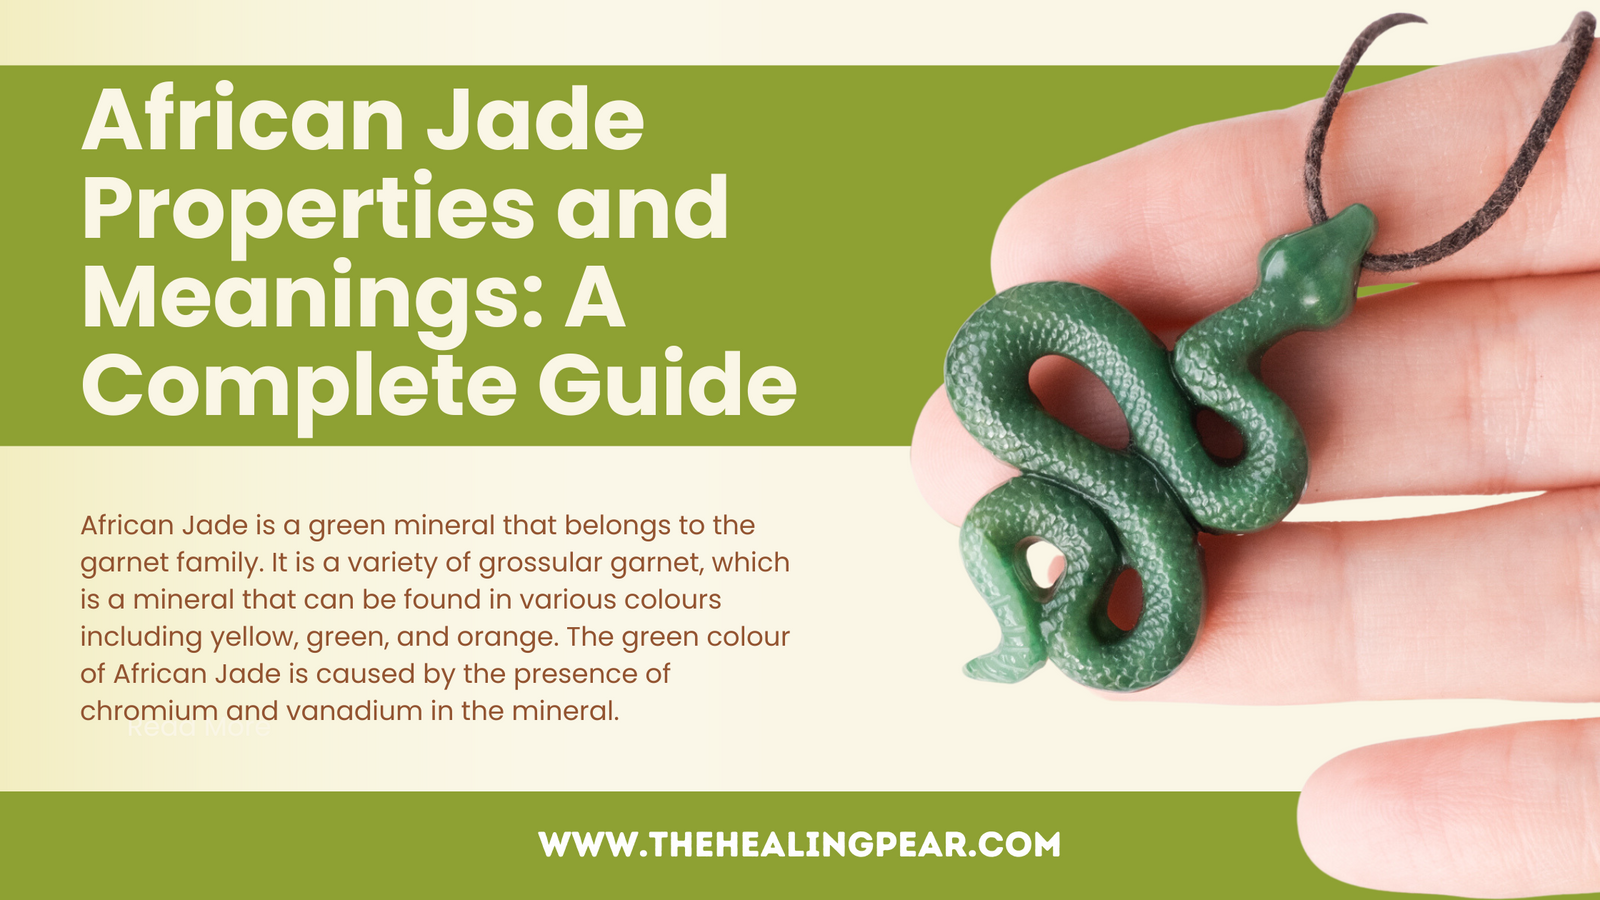 African Jade Properties and Meanings: A Complete Guide